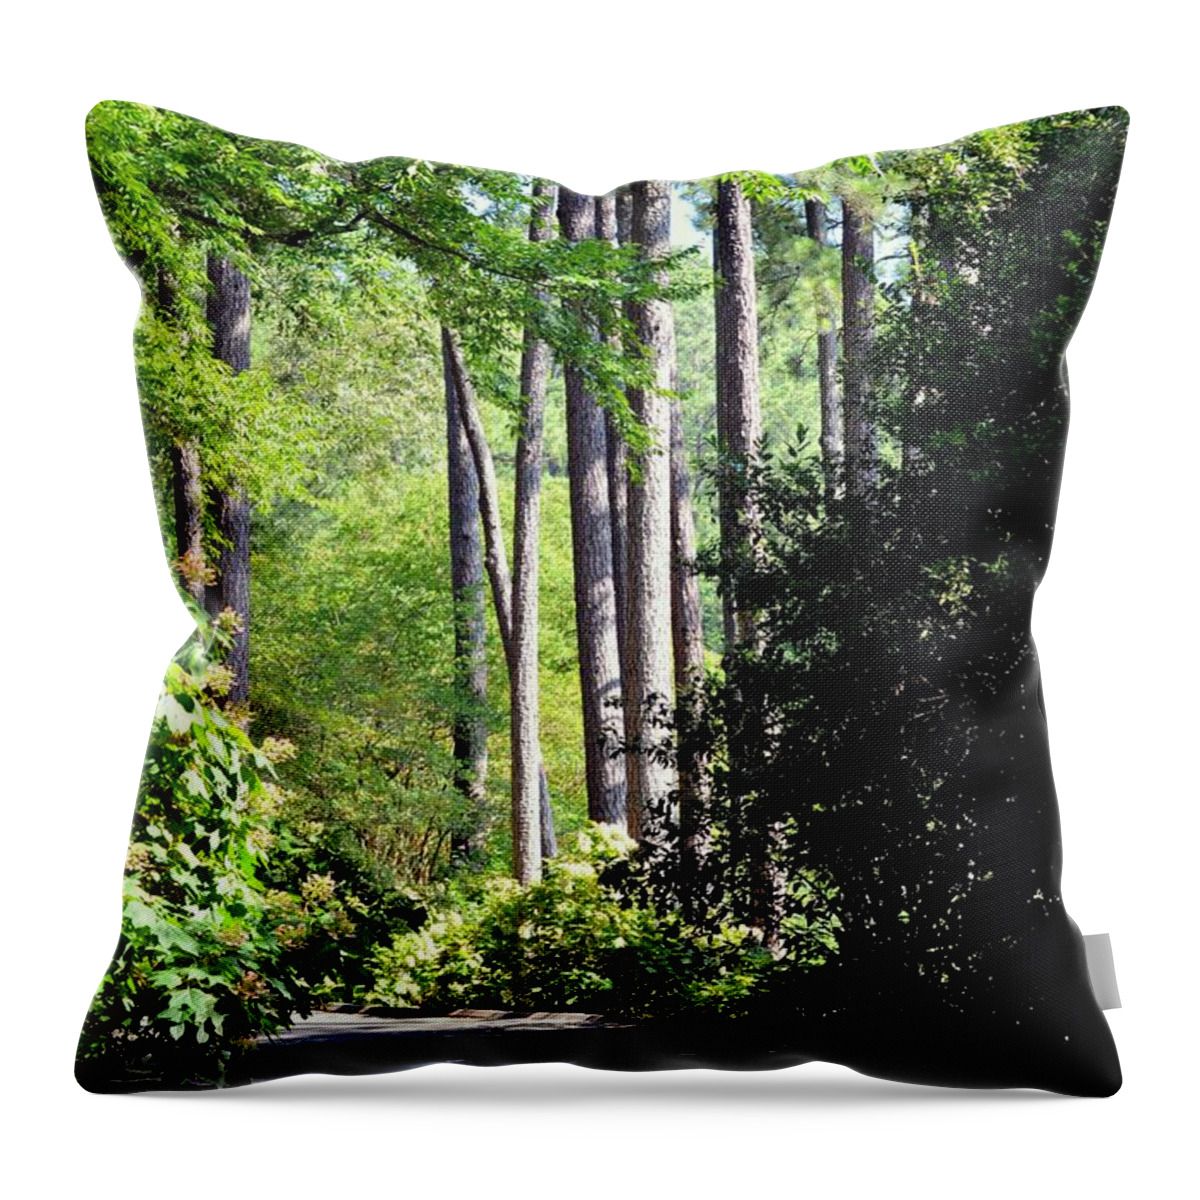 A Walk In The Shade Throw Pillow featuring the photograph A Walk in the Shade by Maria Urso